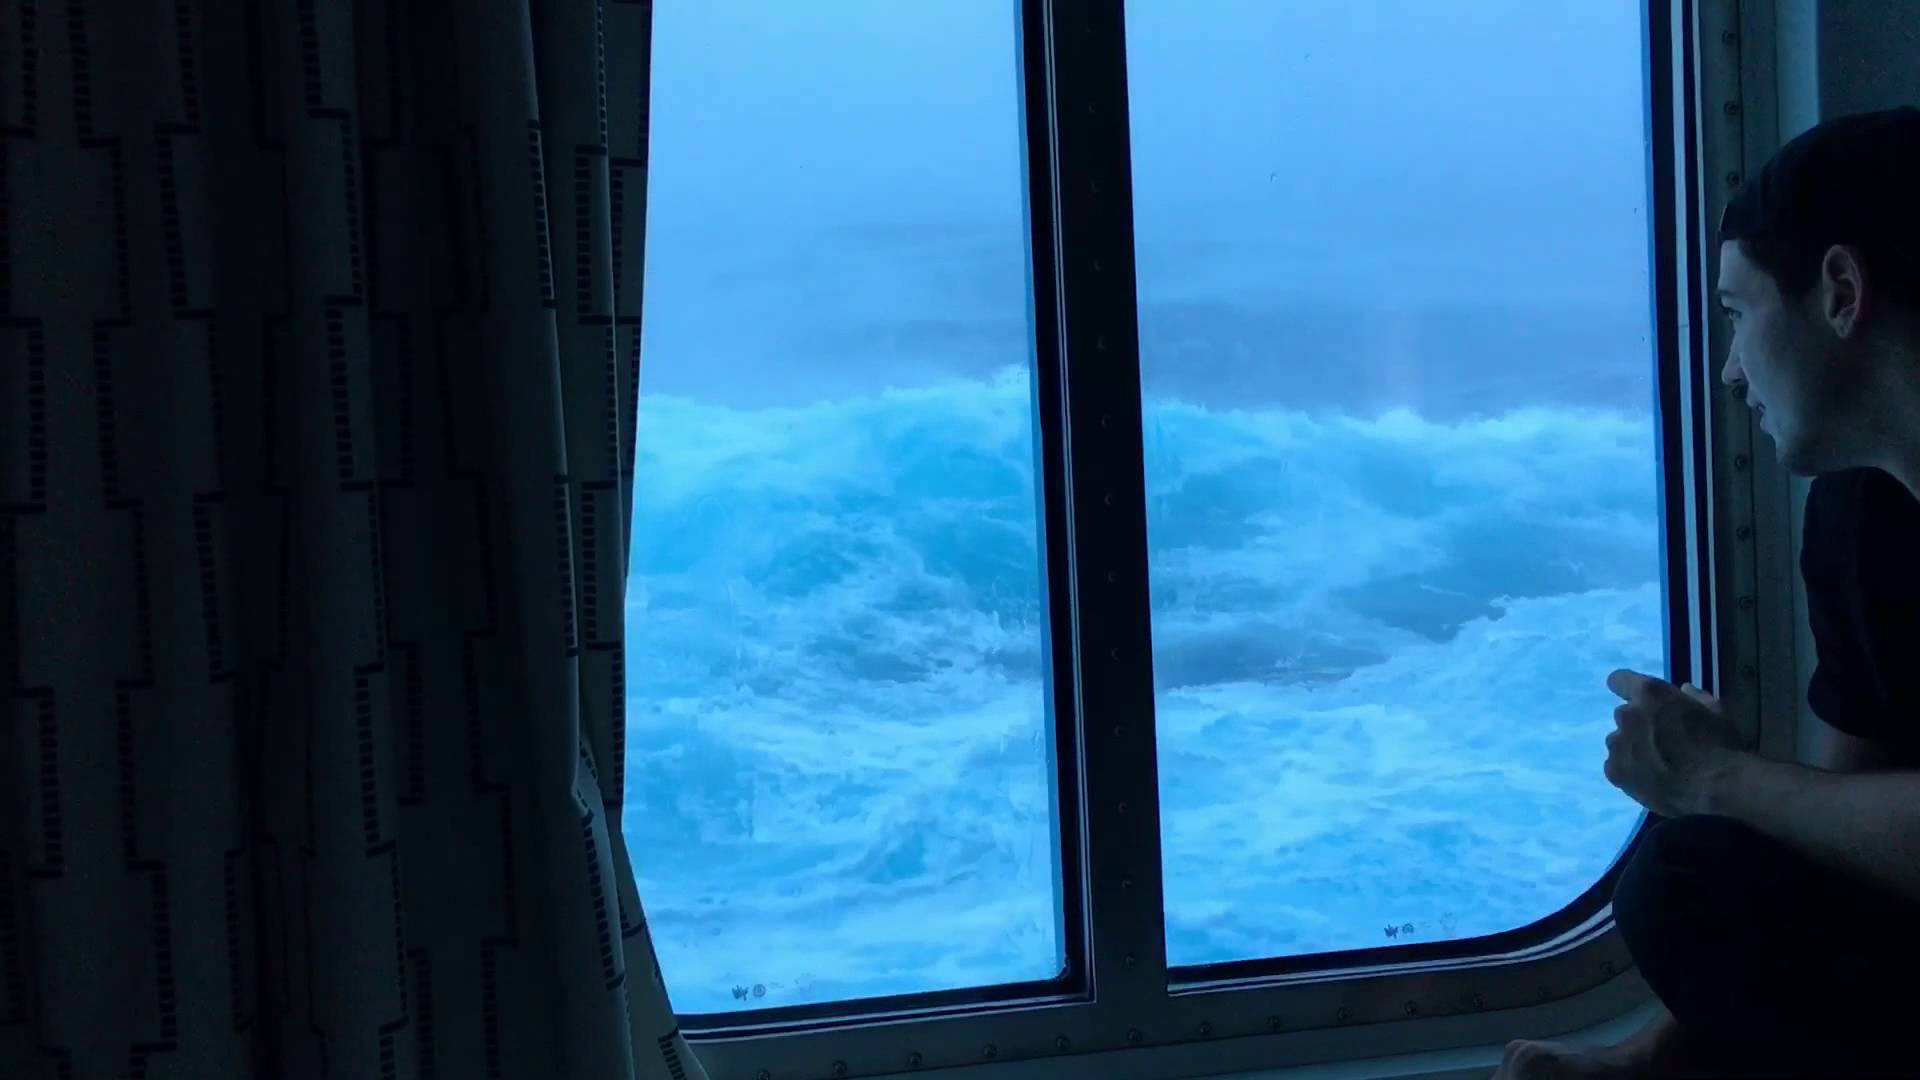 Anthem Of The Seas Vs huge waves and 120 mph winds. Viewed from my room on the third floor!